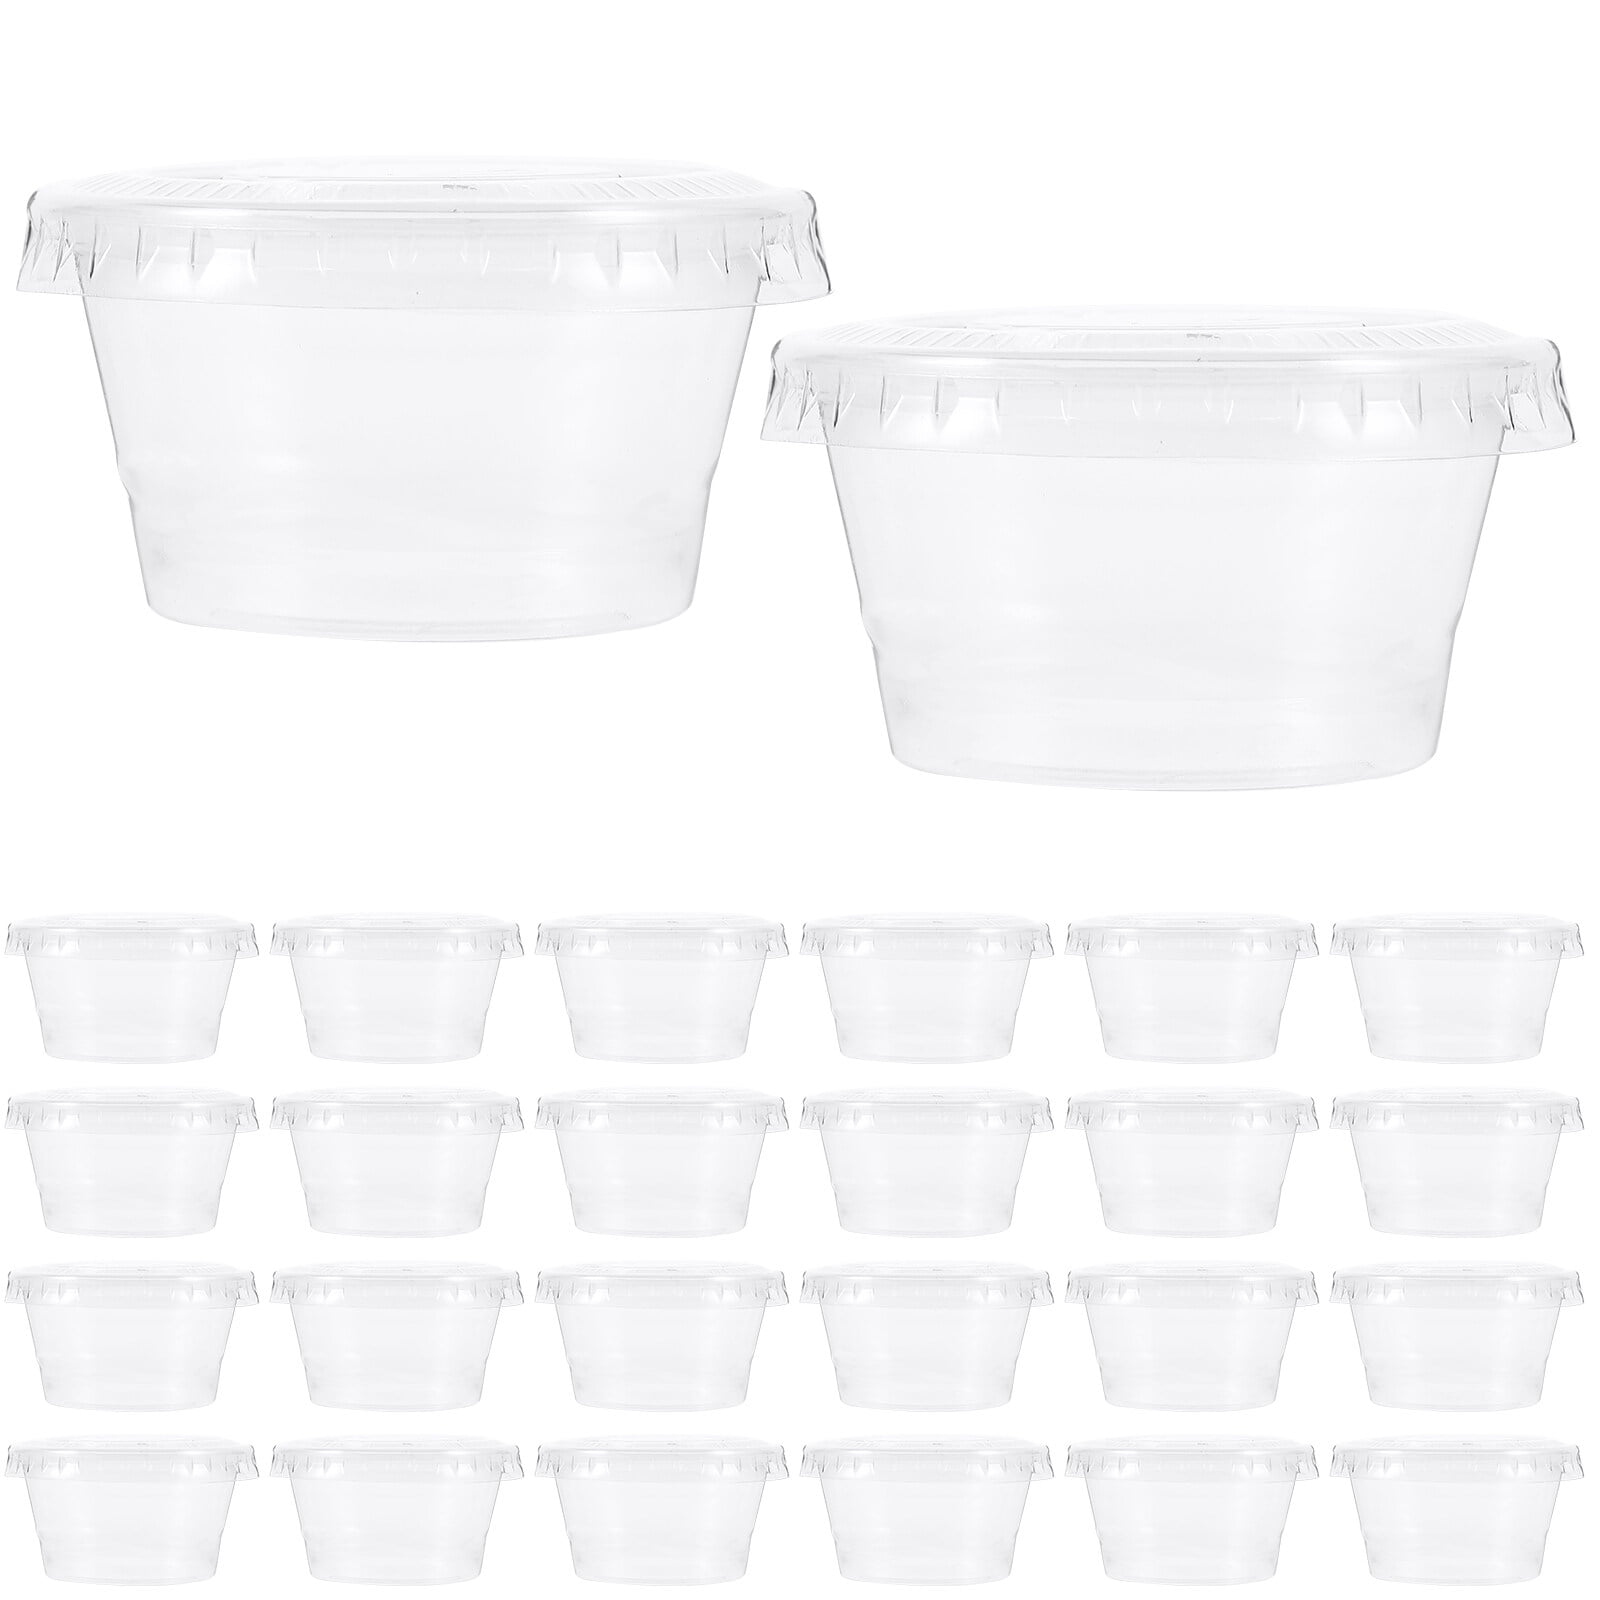 250 Pack] 3.25 oz Portion Cups with Lids- Small Condiment Containers for  Salad Dressing, Salsa & Dipping Sauce, Souffle, Slime, Sample, Spice, Jello  Shots, Disposable Reusable Translucent Ramekins 